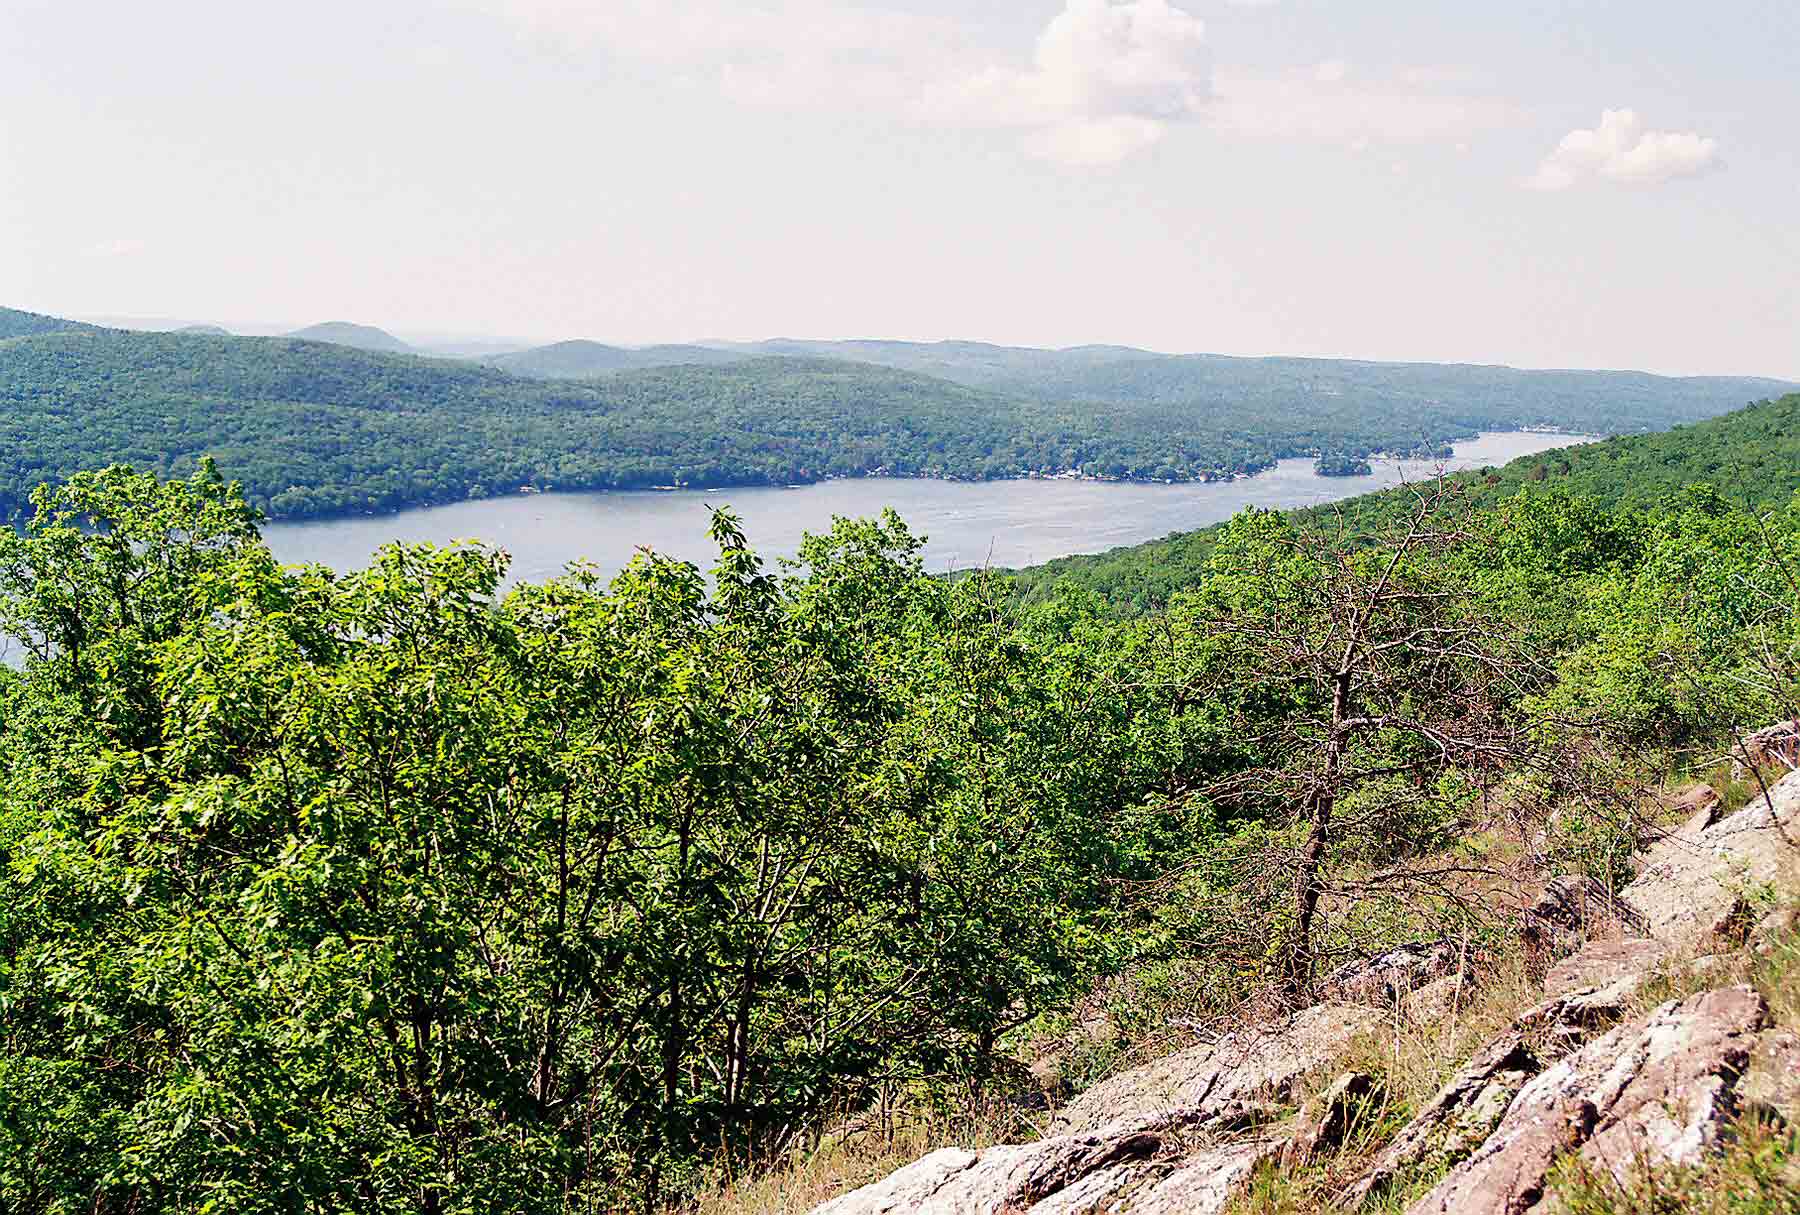 Just north of New Jersey, the AT runs along Bearfort Mountain which offers excellent views, particularly of Greenwood Lake to the east. Taken at approx. mm 2.2.  Courtesy dlcul@conncoll.edu